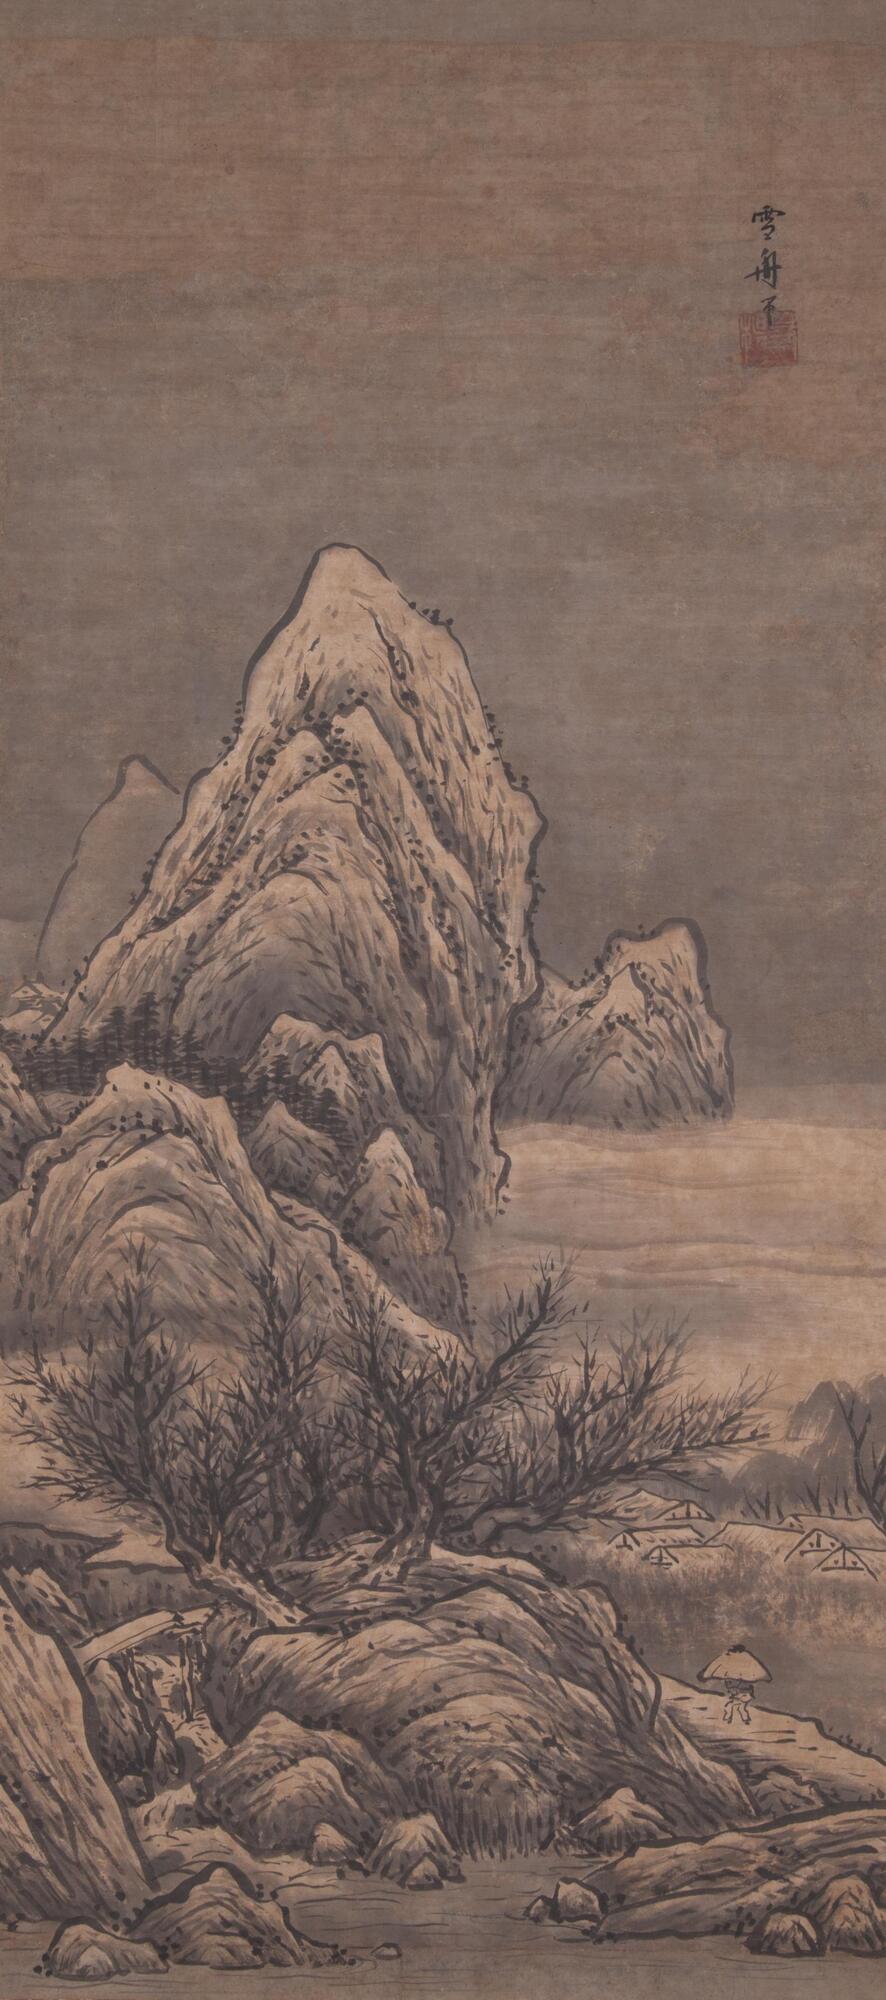 In this handing scroll, there are mountains in the background. There are rocks and trees scattered on a shore that leads to a body of water. In the upper right corner, there is an inscription and a seal.